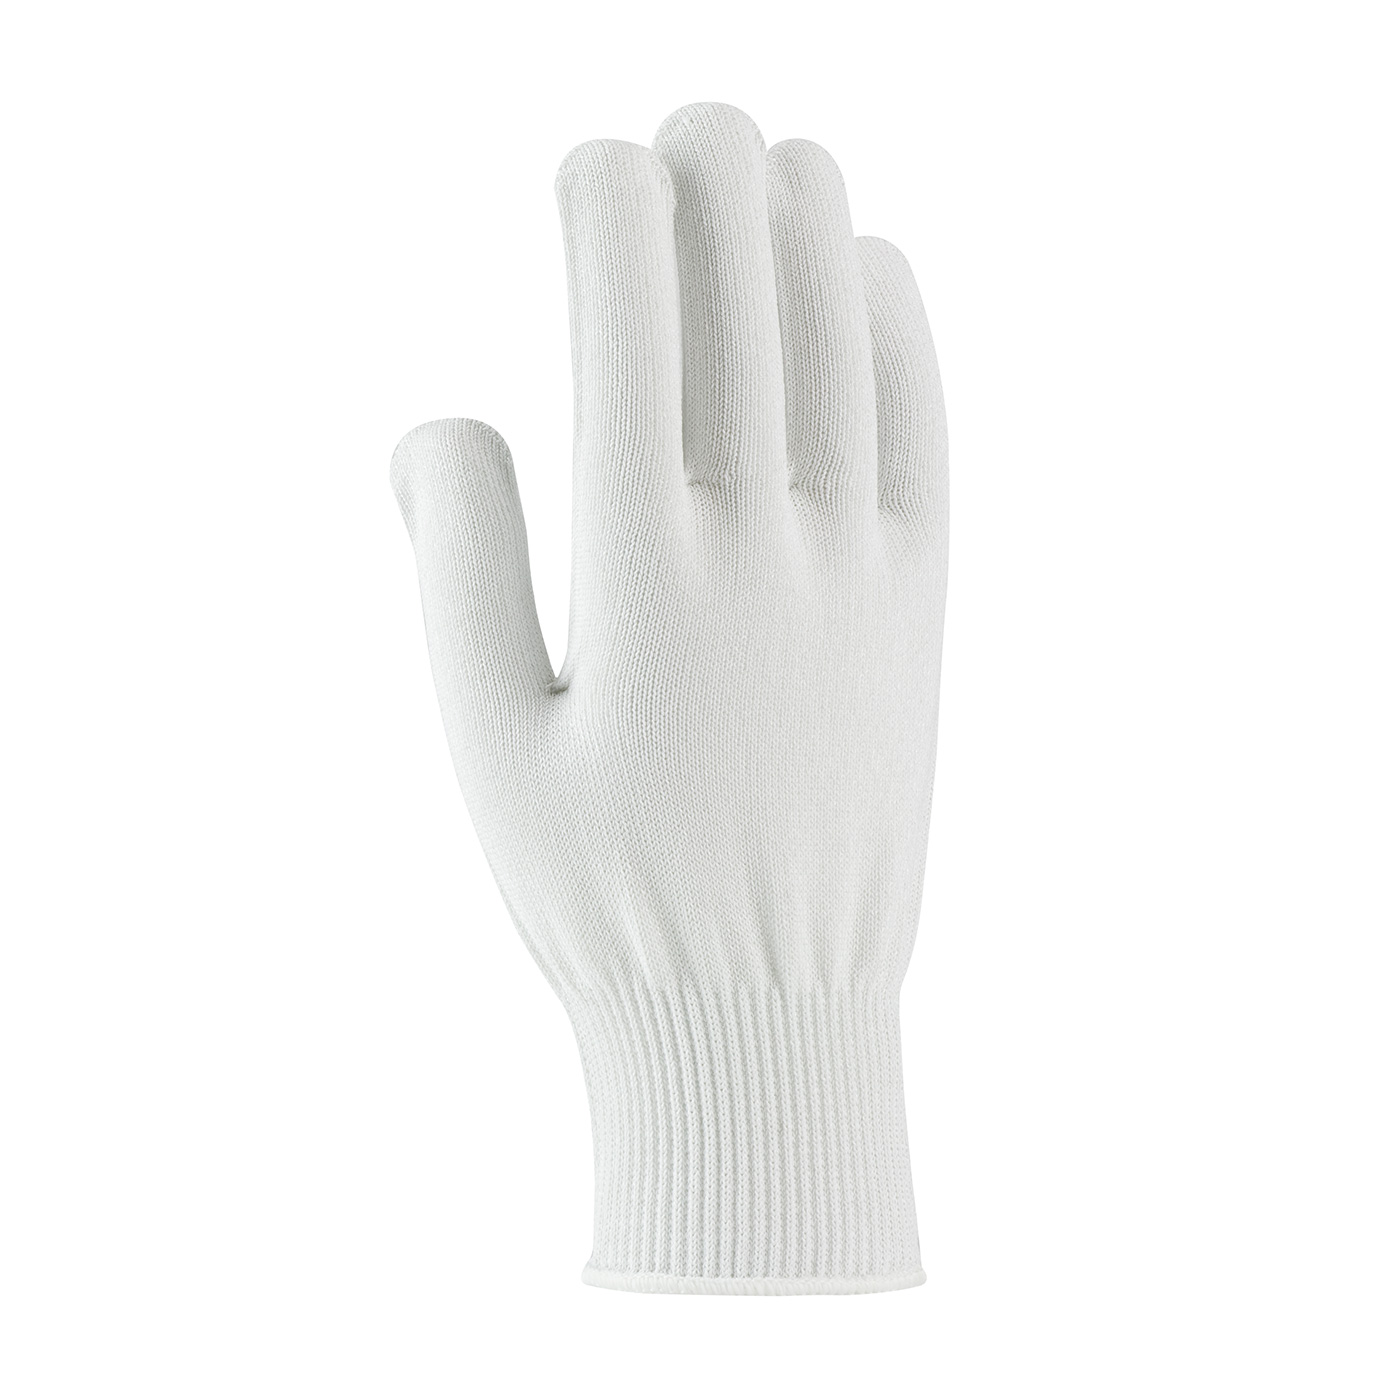 PIP Kut Gard® White Seamless Knit Antimicrobial/Dyneema® Cut Resistant Gloves - Light Weight